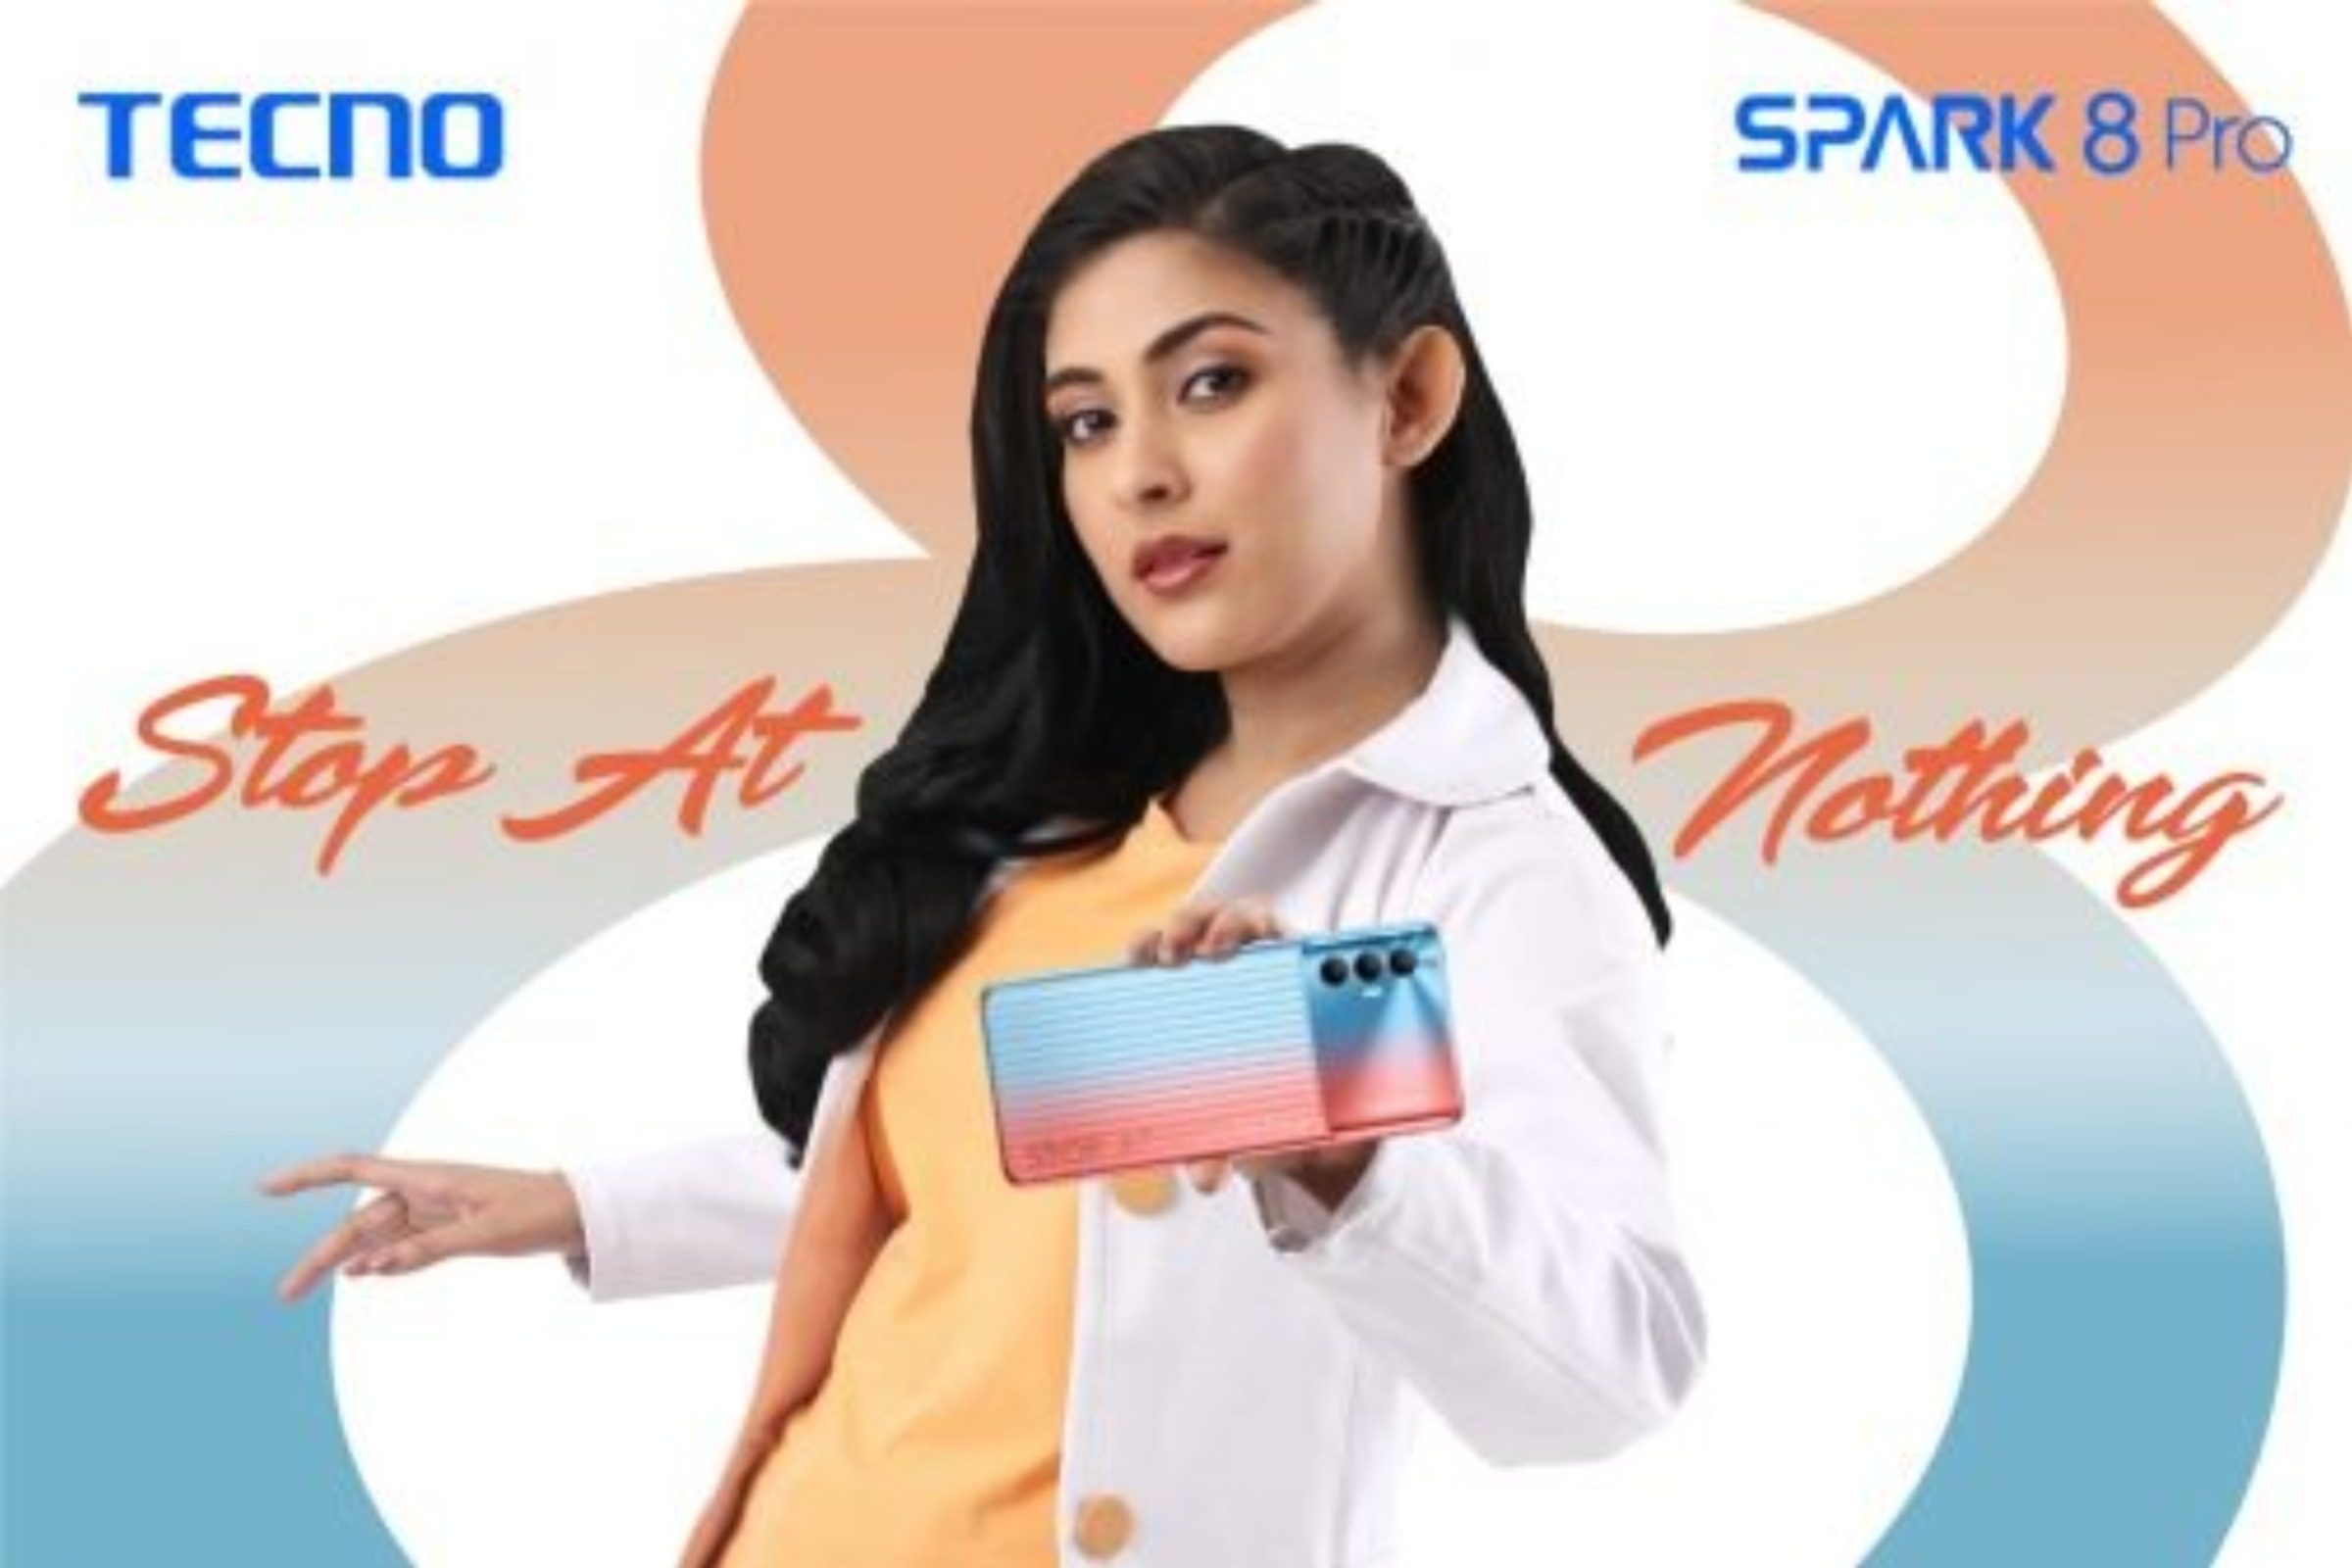 Tecno Spark 8 Pro With MediaTek Helio G85, 5000mAh battery Launched in Bangladesh: Price, Features